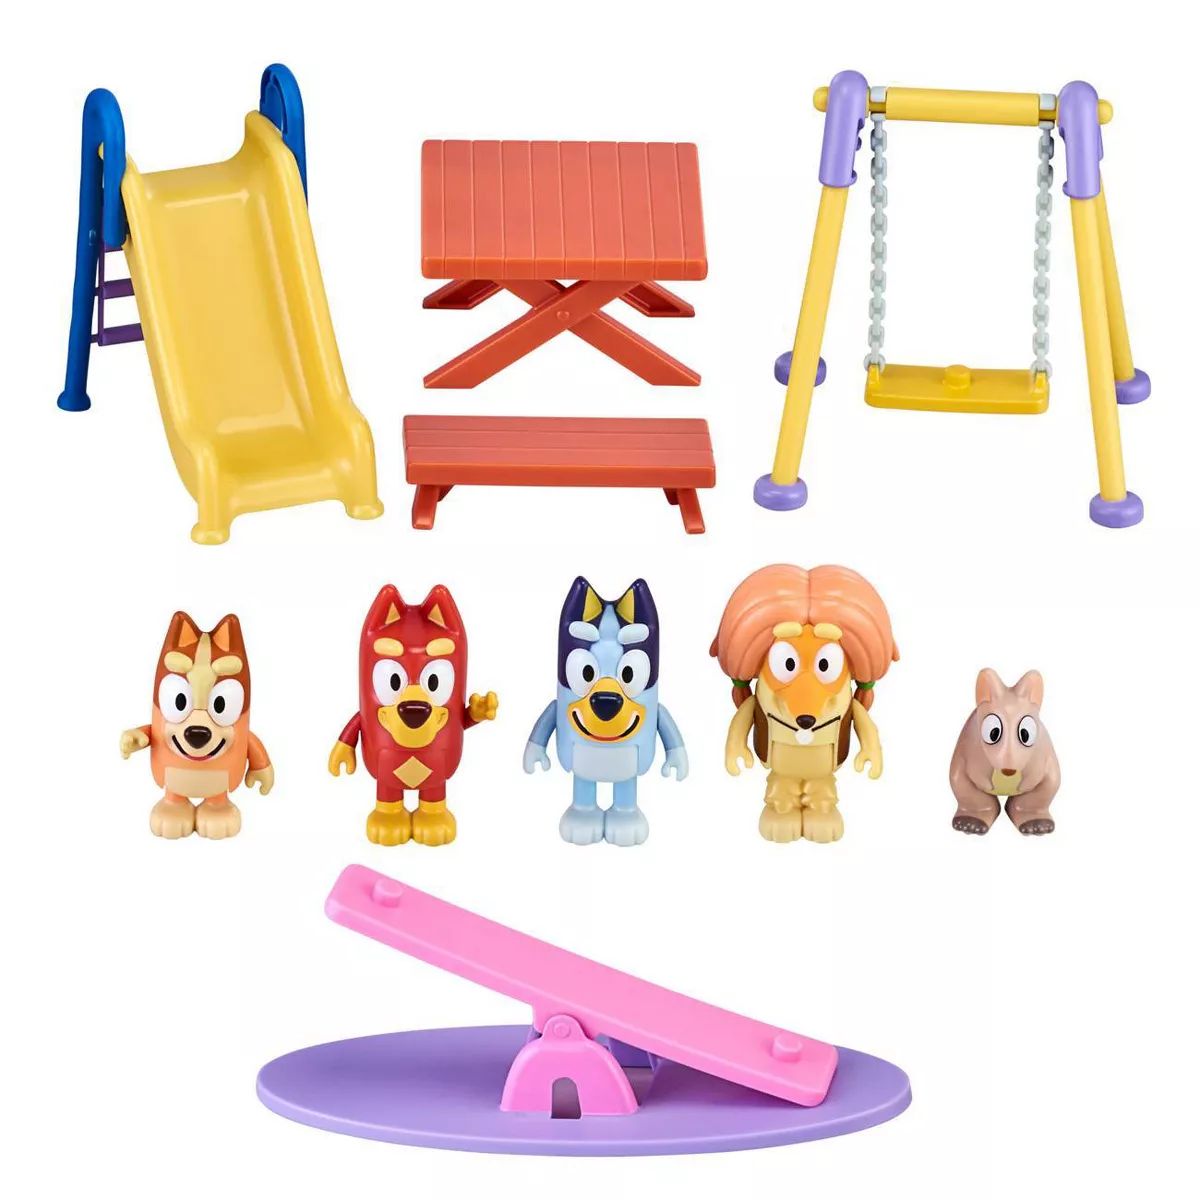 Bluey Deluxe Park Themed Playset | Target